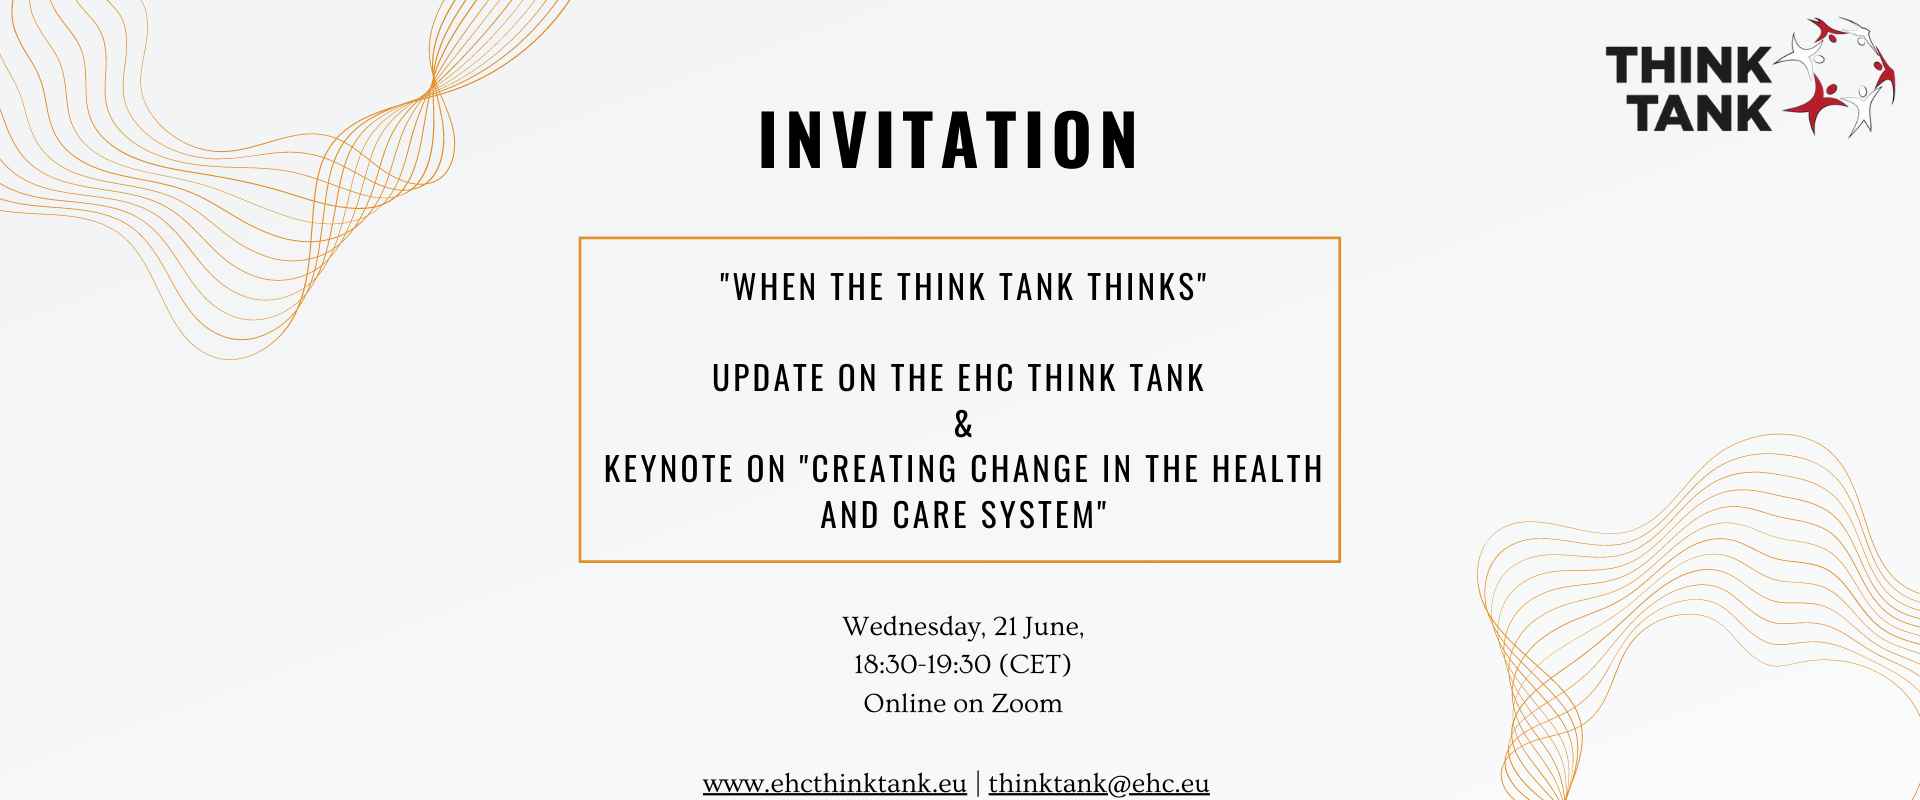 “When the Think Tank thinks” – the EHC Think Tank annual event